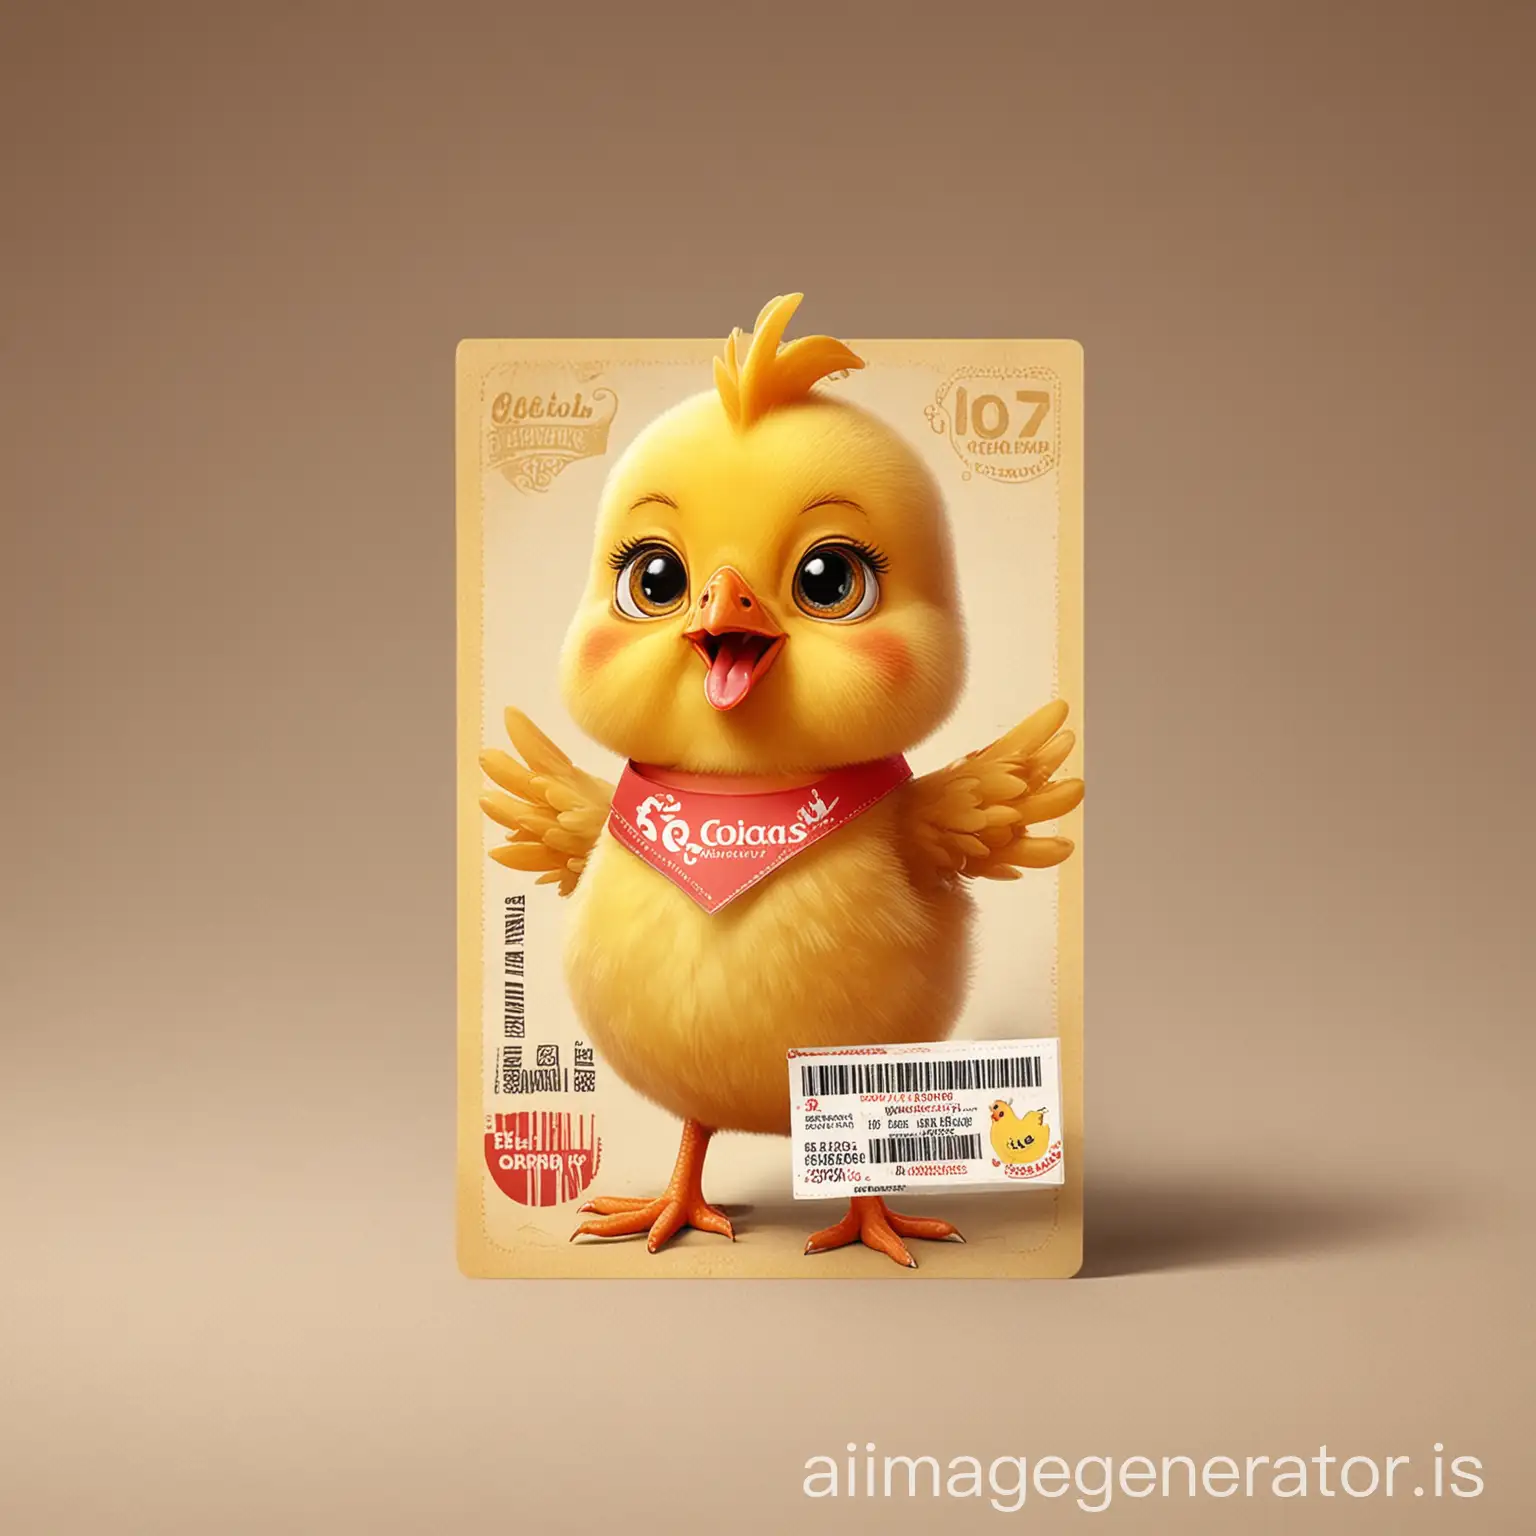 Cute yellow baby chicken cartoons : a cute chicken with food coupon and discount coupon card.